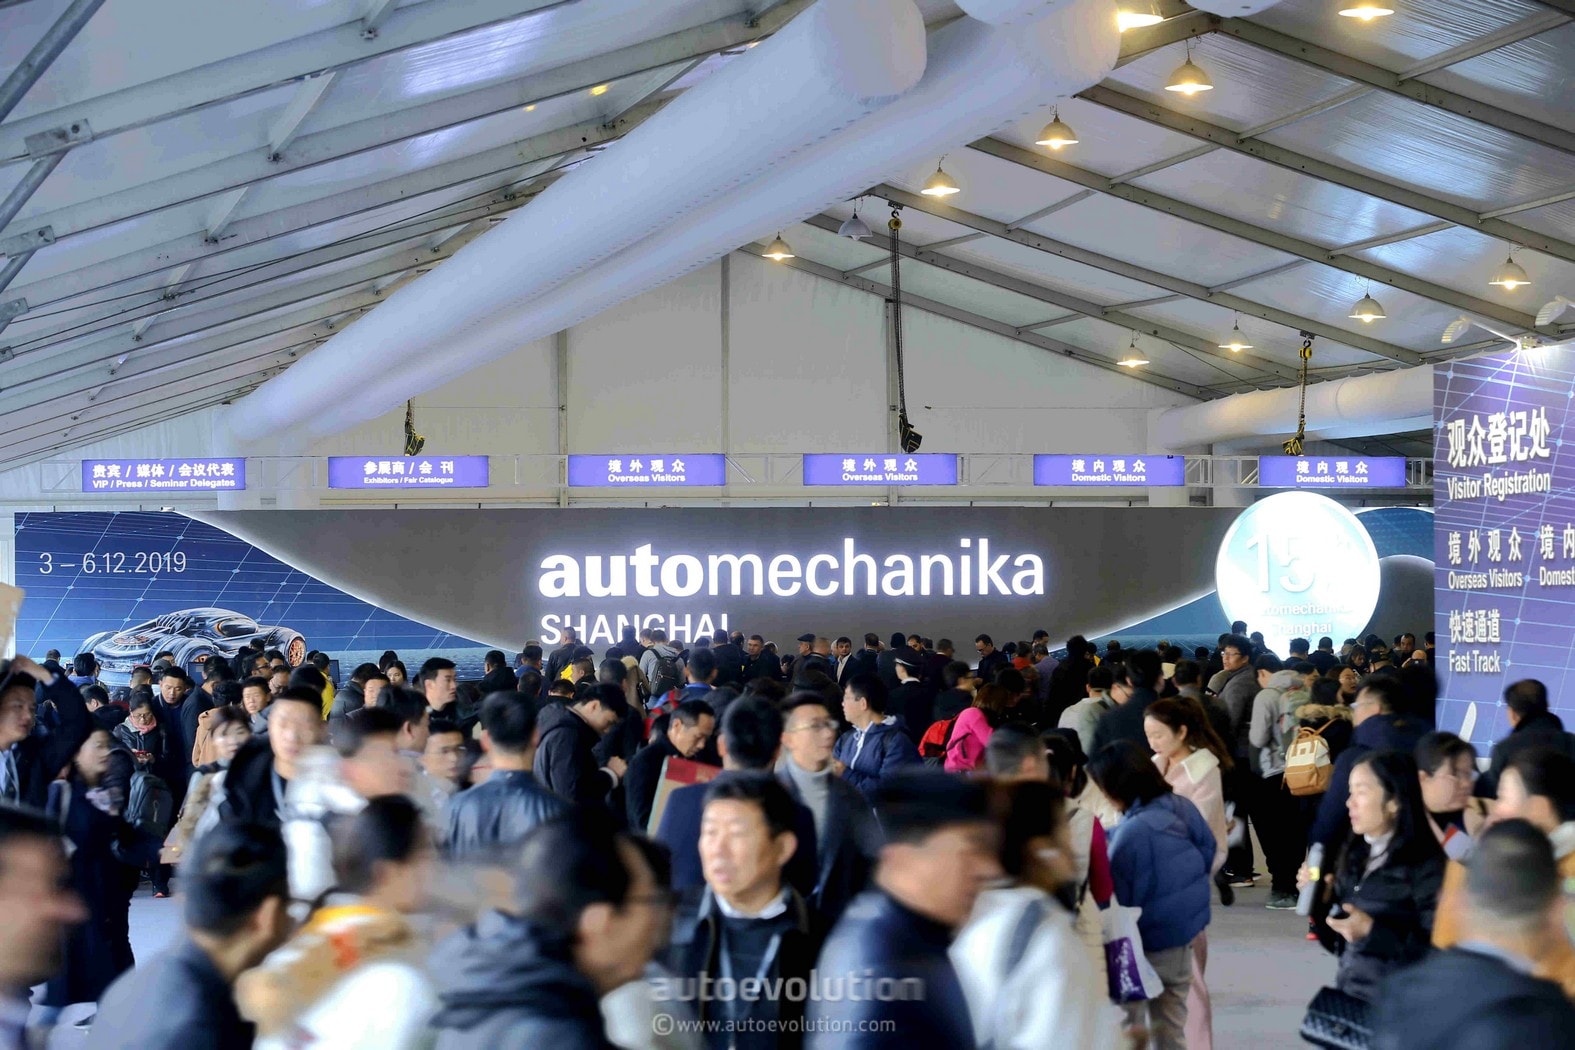 Automechanika Shanghai Shows Opens a New Trend in Automotive Exhibition